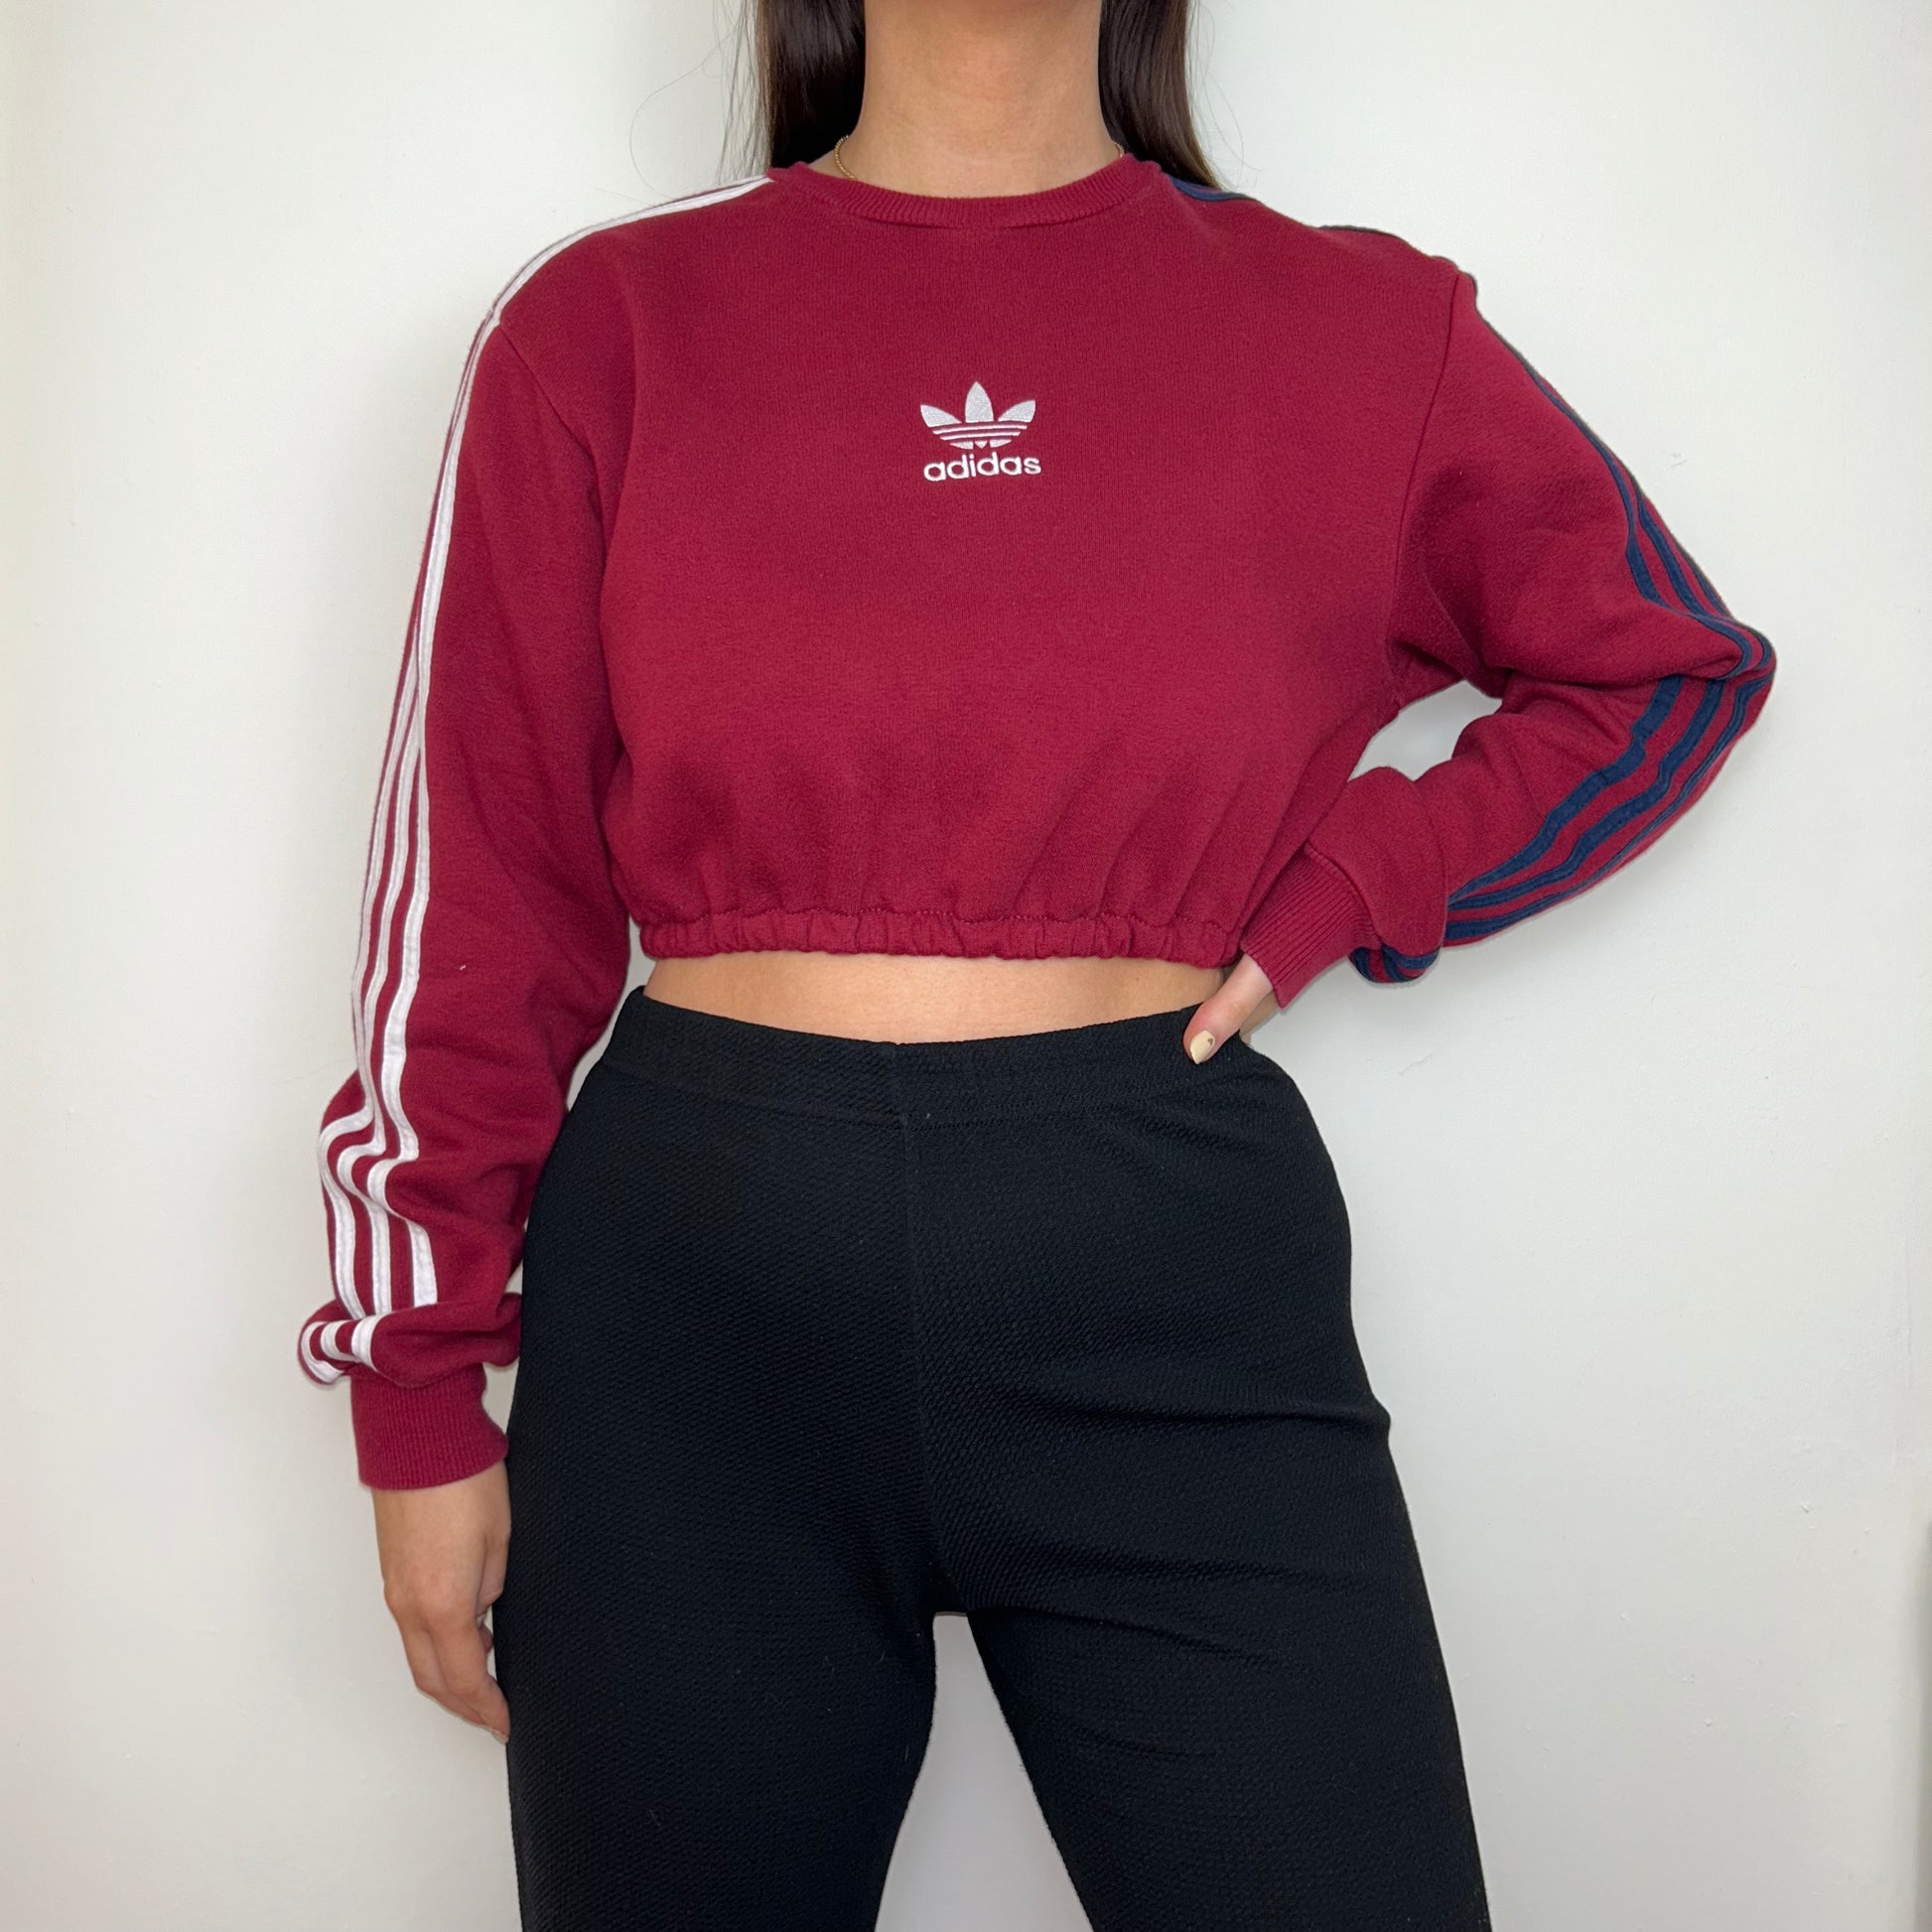 burgundy cropped sweatshirt with white adidas logo shown on a model wearing black trousers